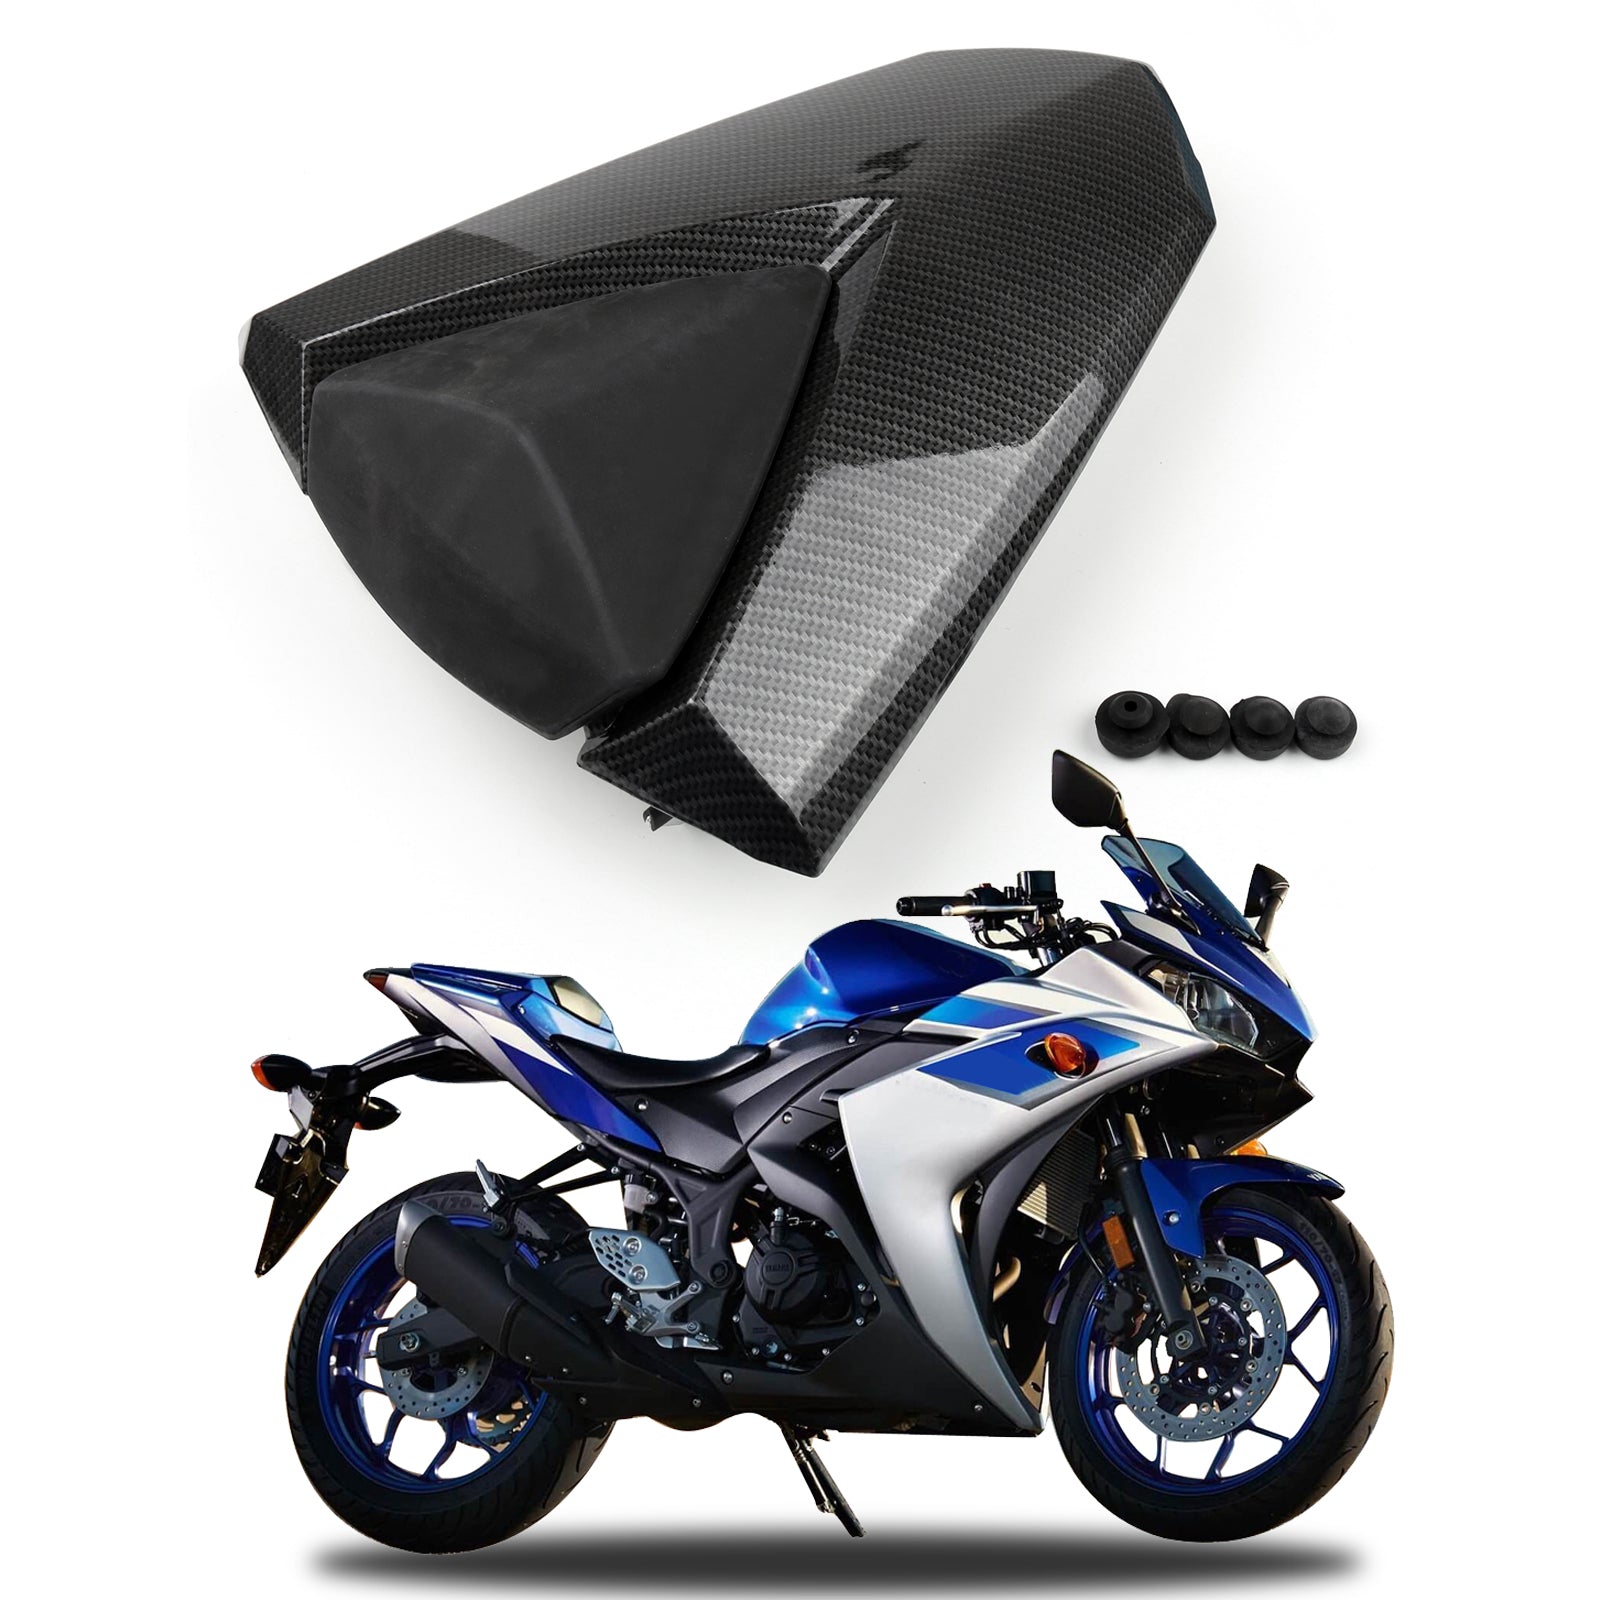 Coprisedile posteriore in ABS per Yamaha YZF R25 2013-2021 R3 2015-2021 MT-03 2014 Generico